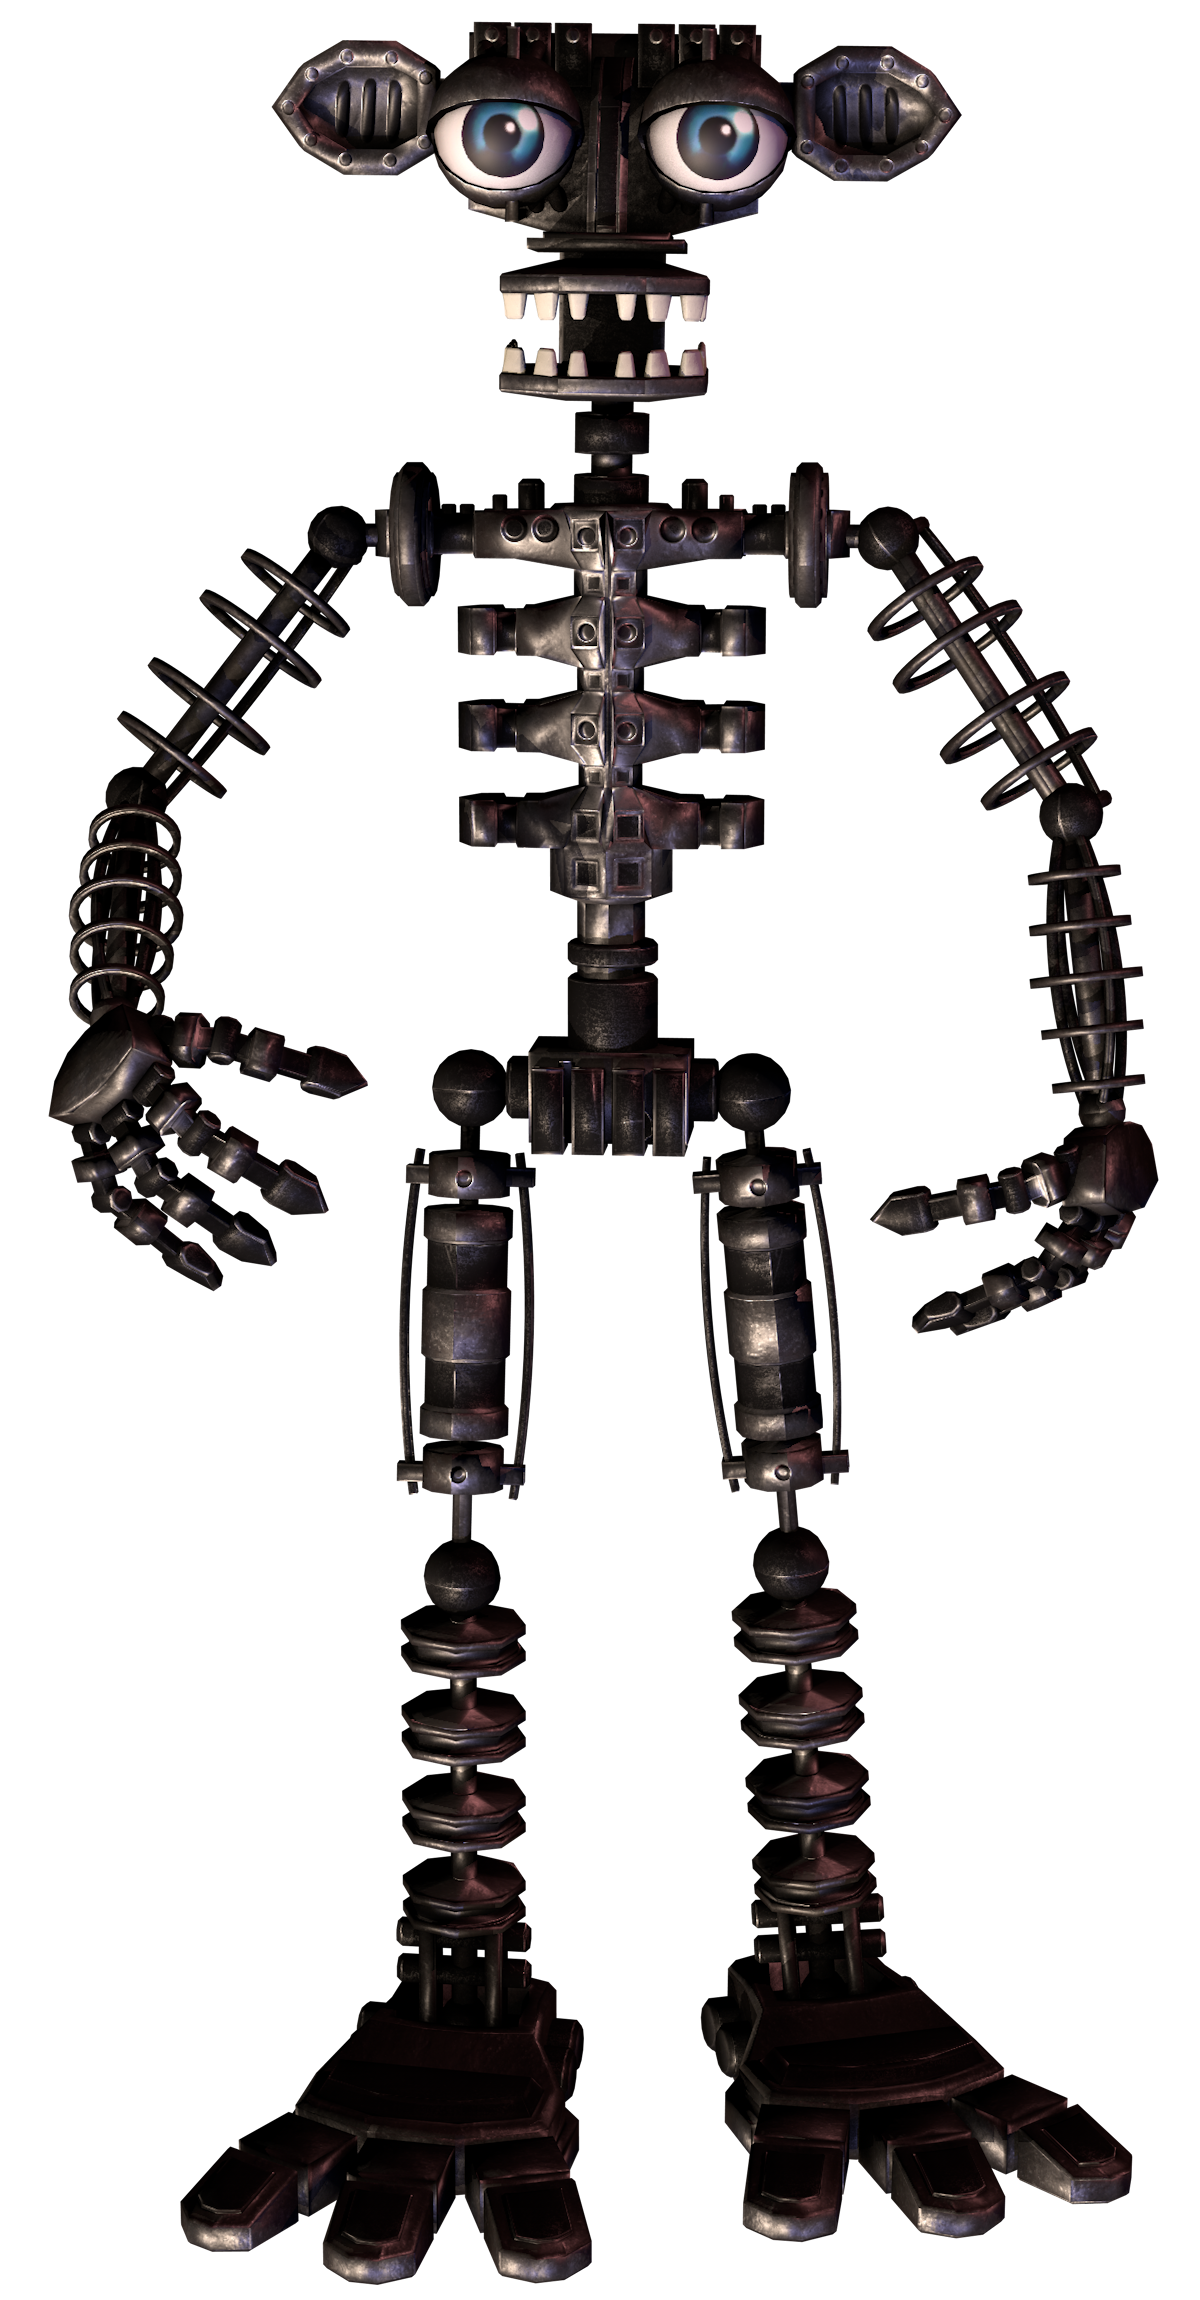 Endo-02 is an endoskeleton designed for the withered animatronics presumabl...